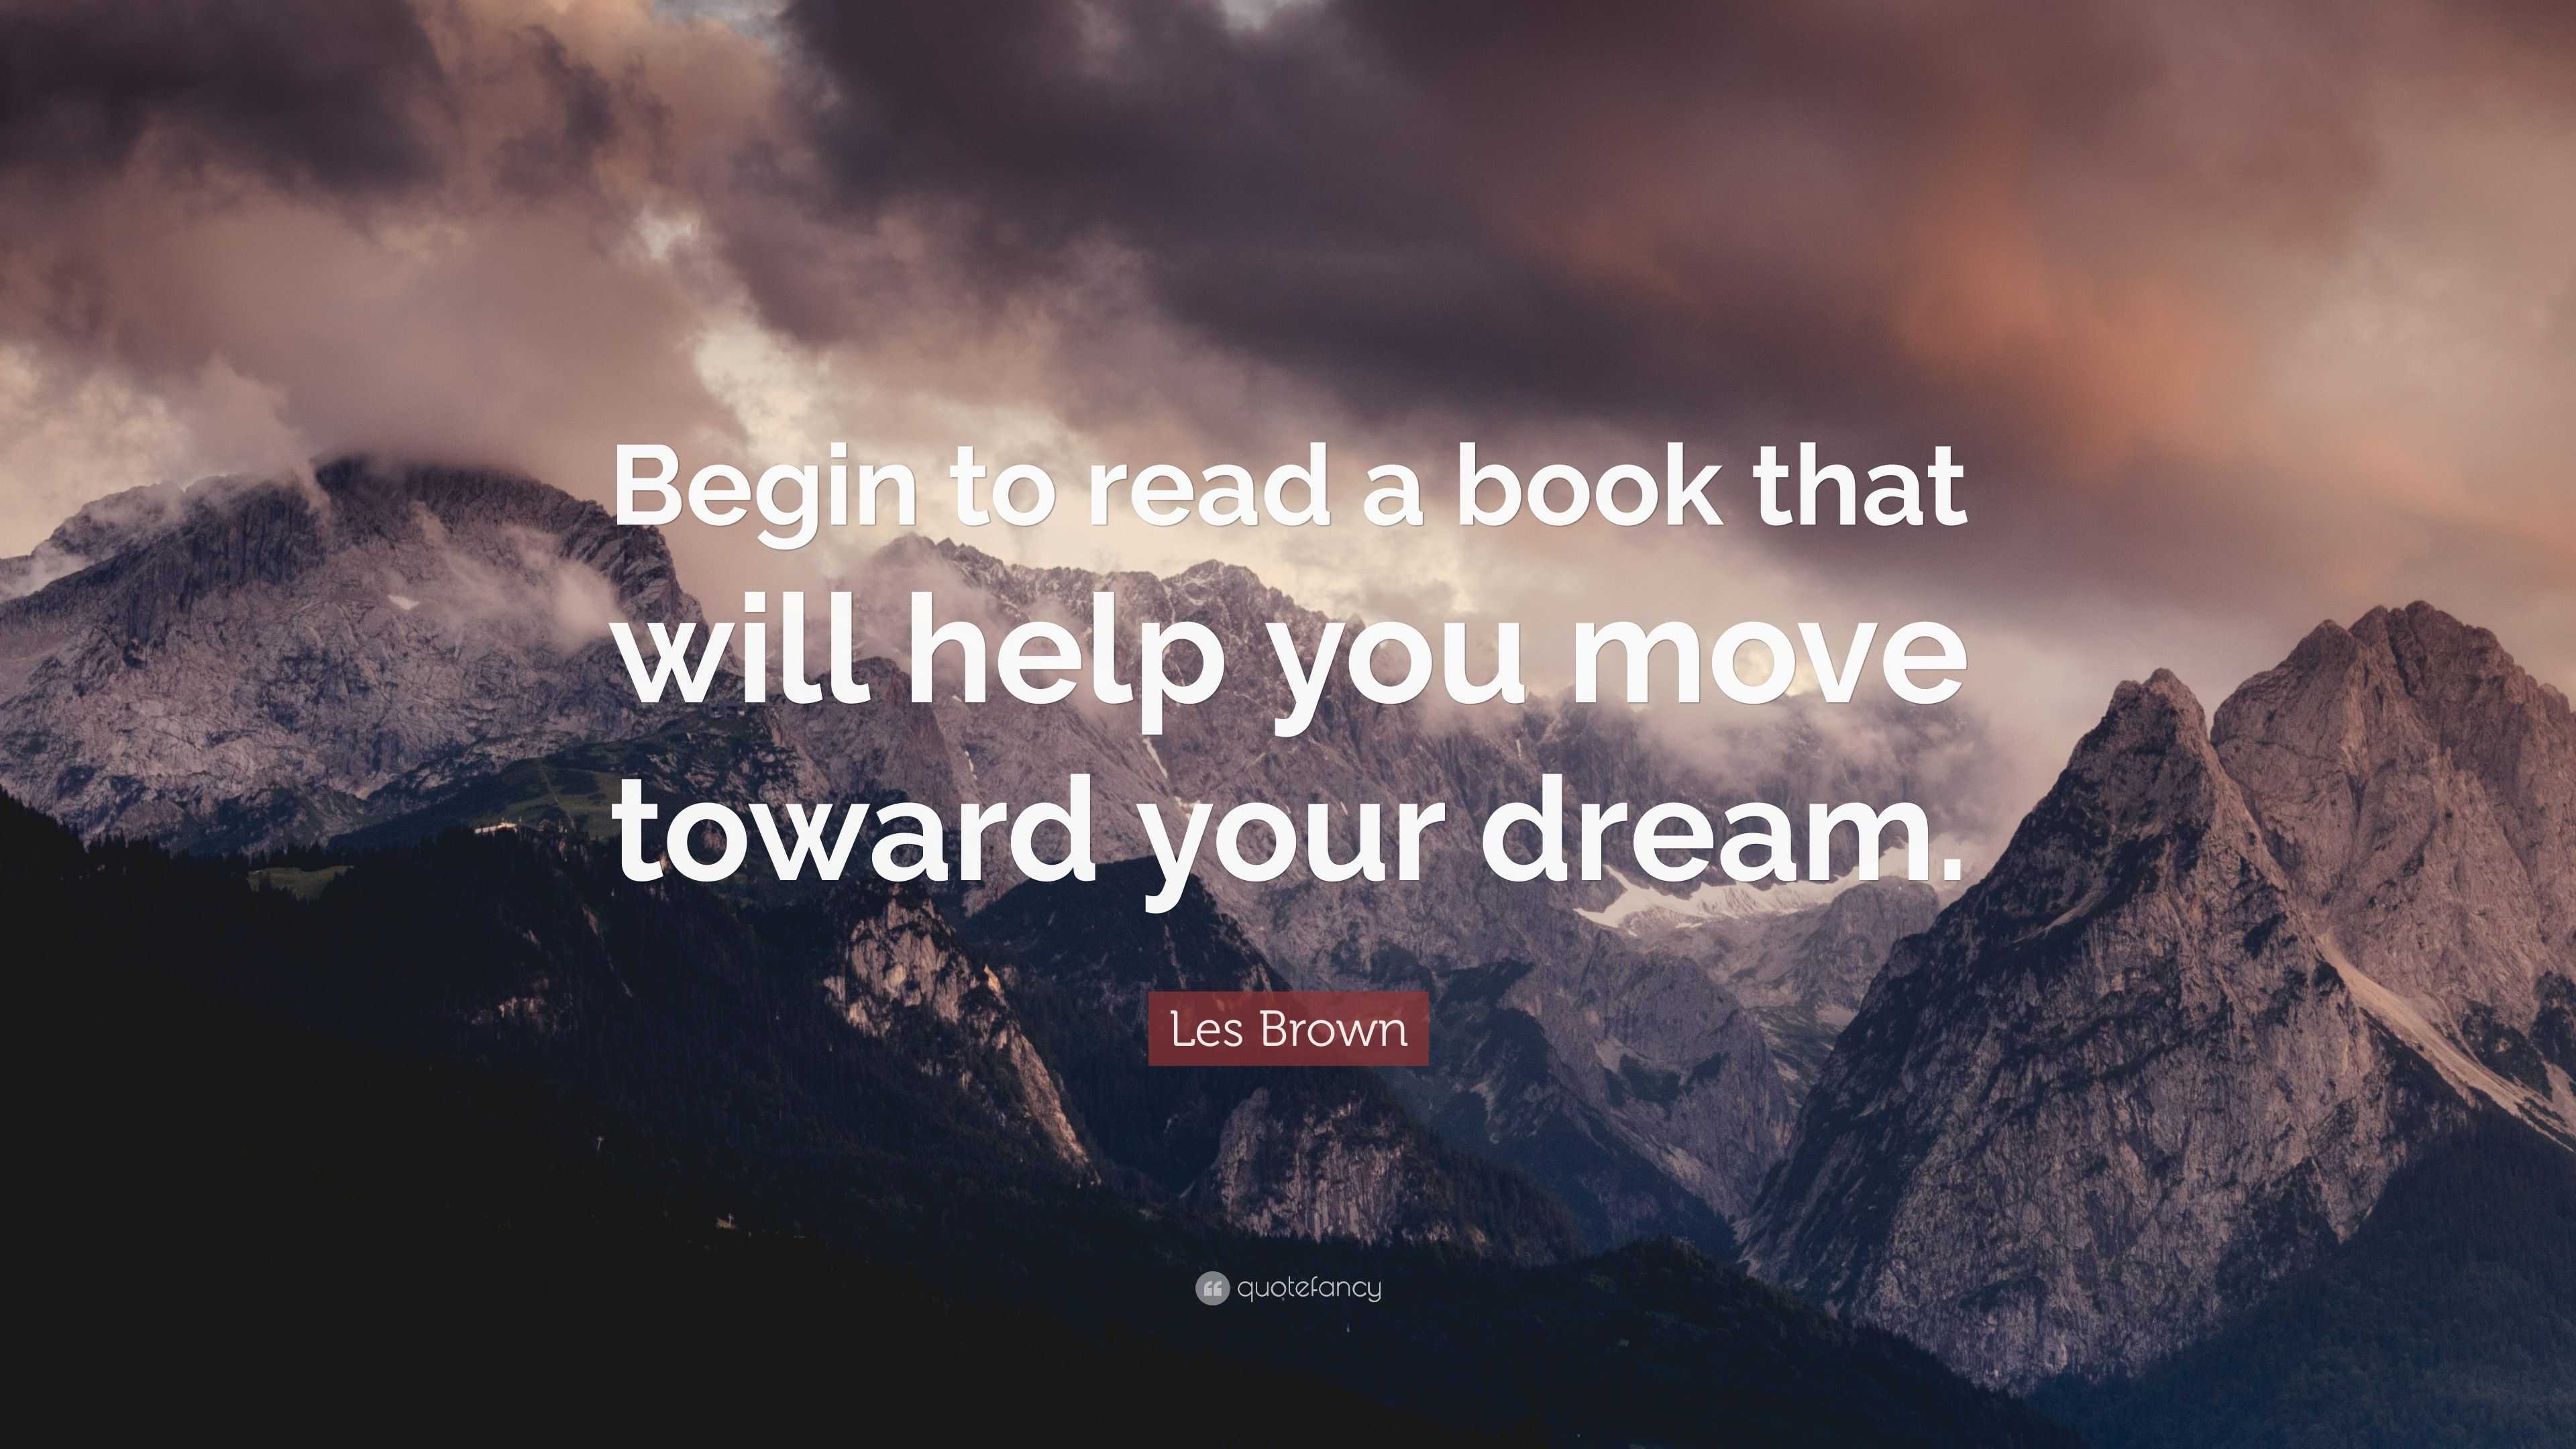 Les Brown Quote: “Begin to read a book that will help you move toward ...